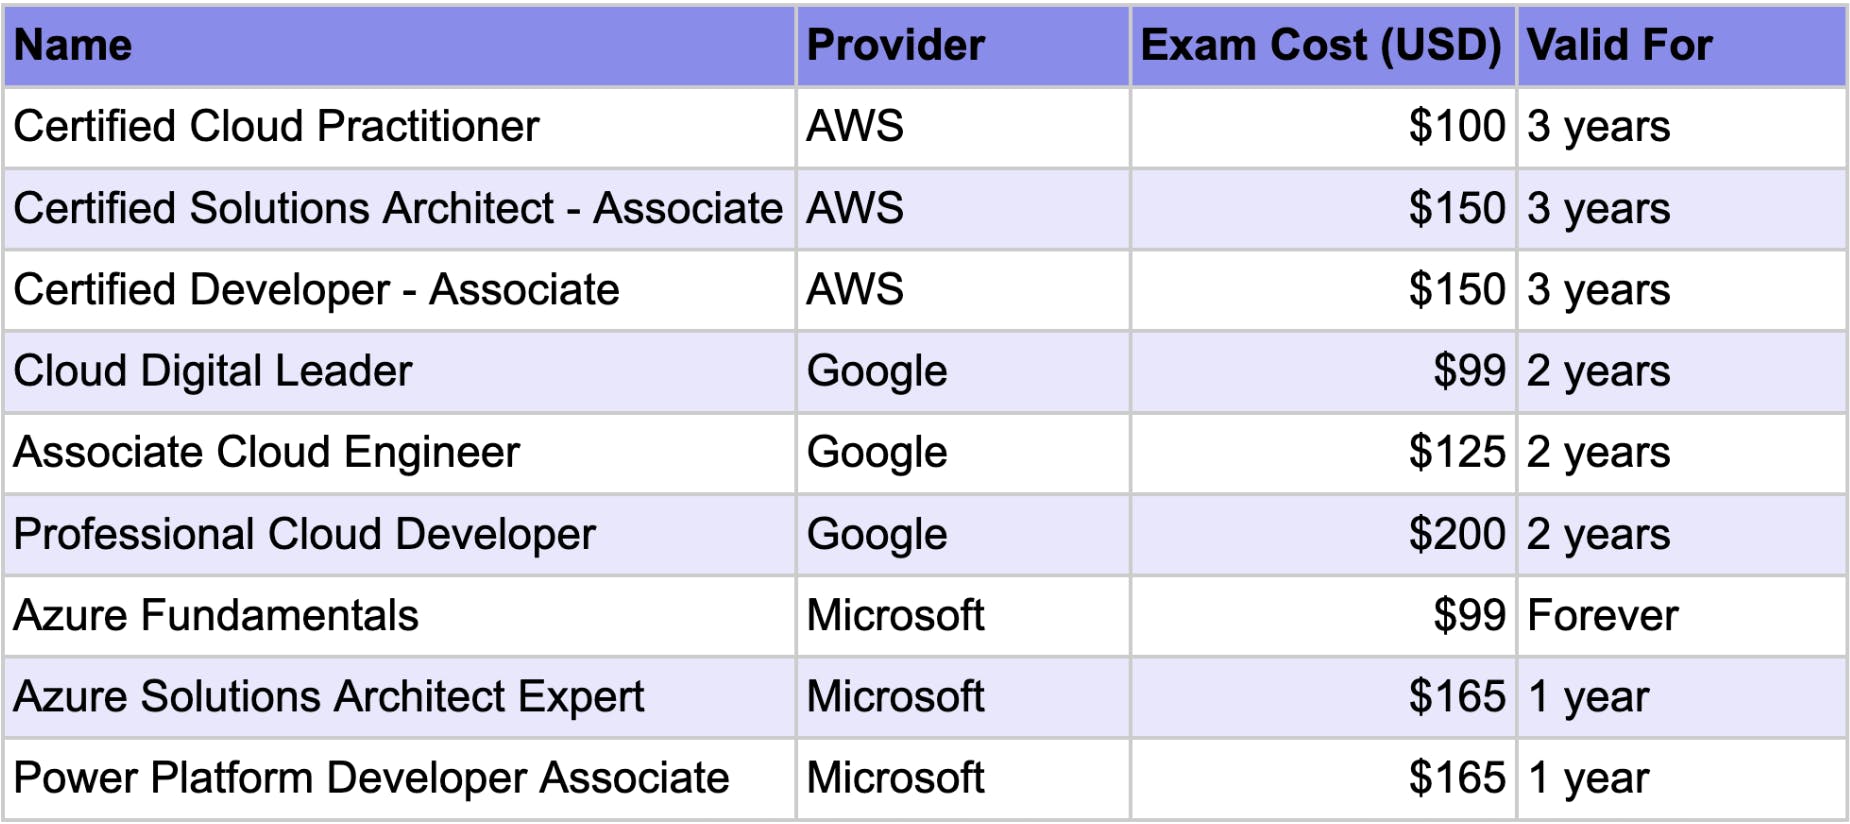 example-cert-costs.png